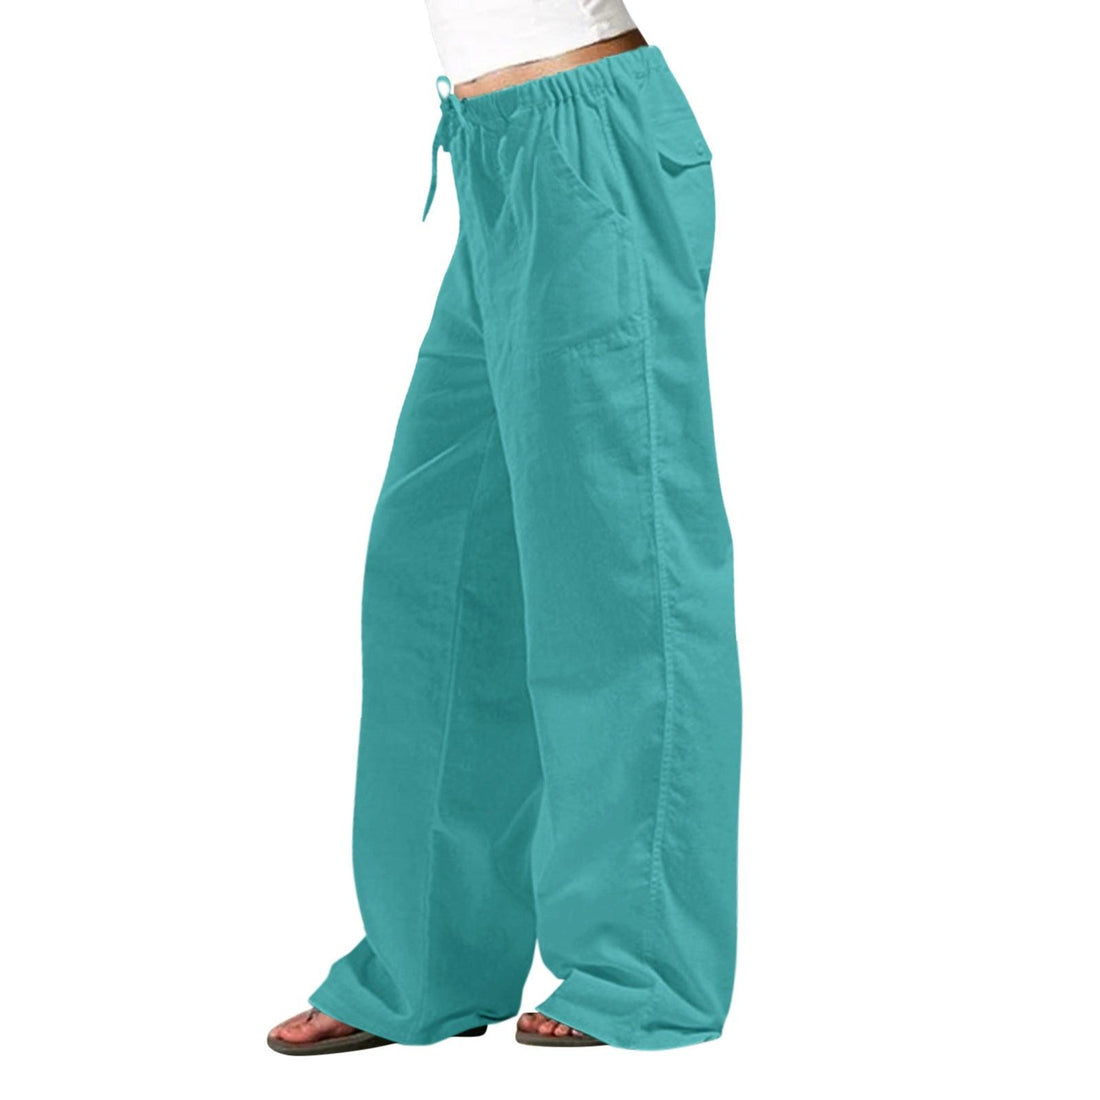 Comfortable and Stylish Elastic Waist Linen Trousers for Women: Effortless Chic with Added Convenience